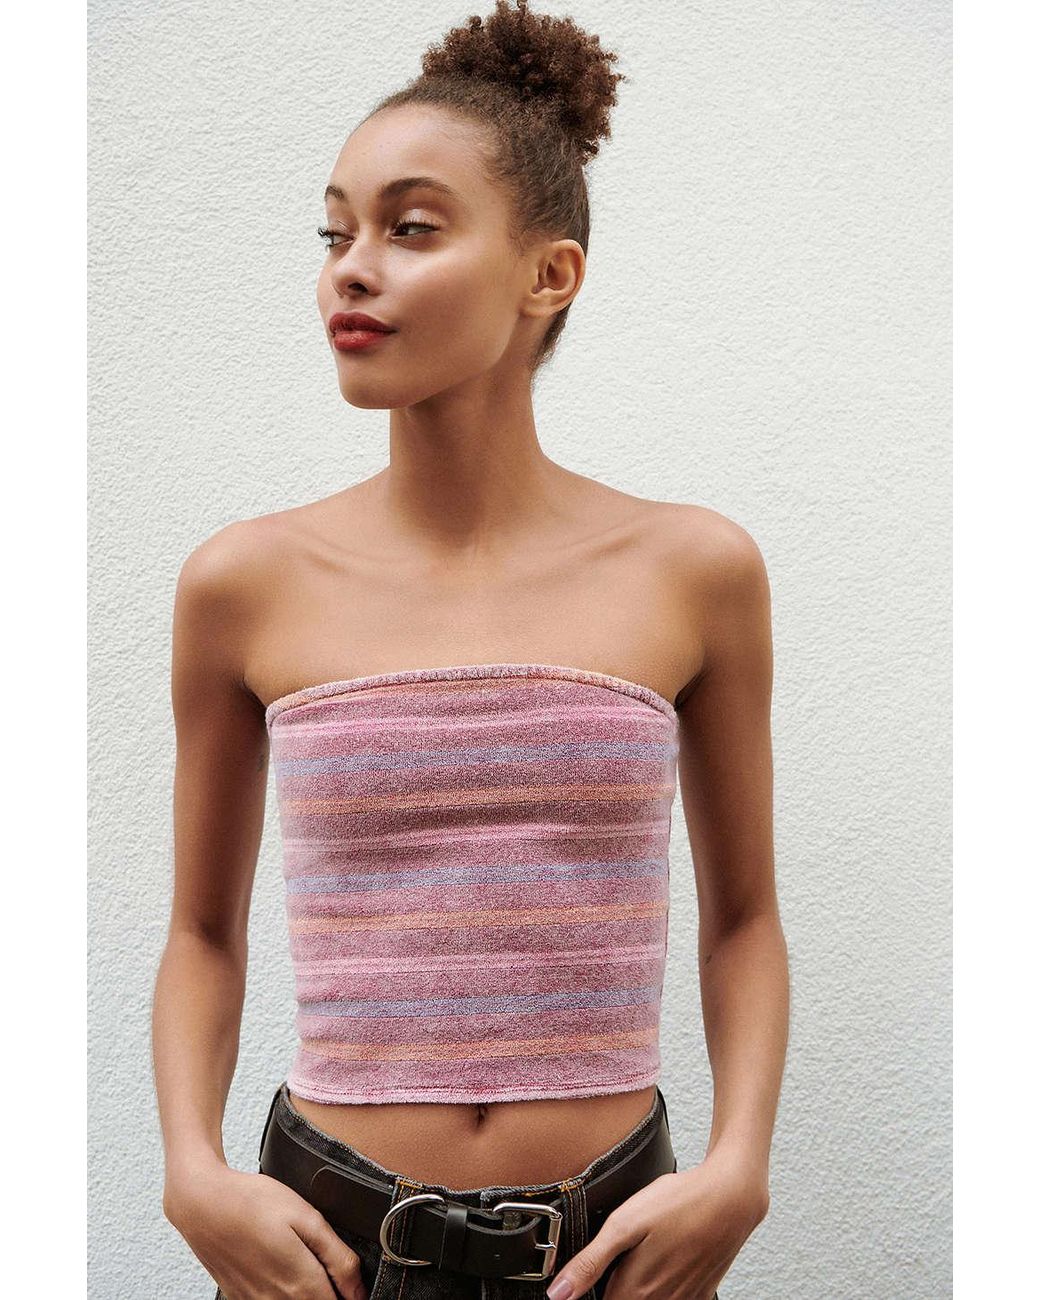 Outfitters Uo Glitter Tube Top in Purple | Lyst